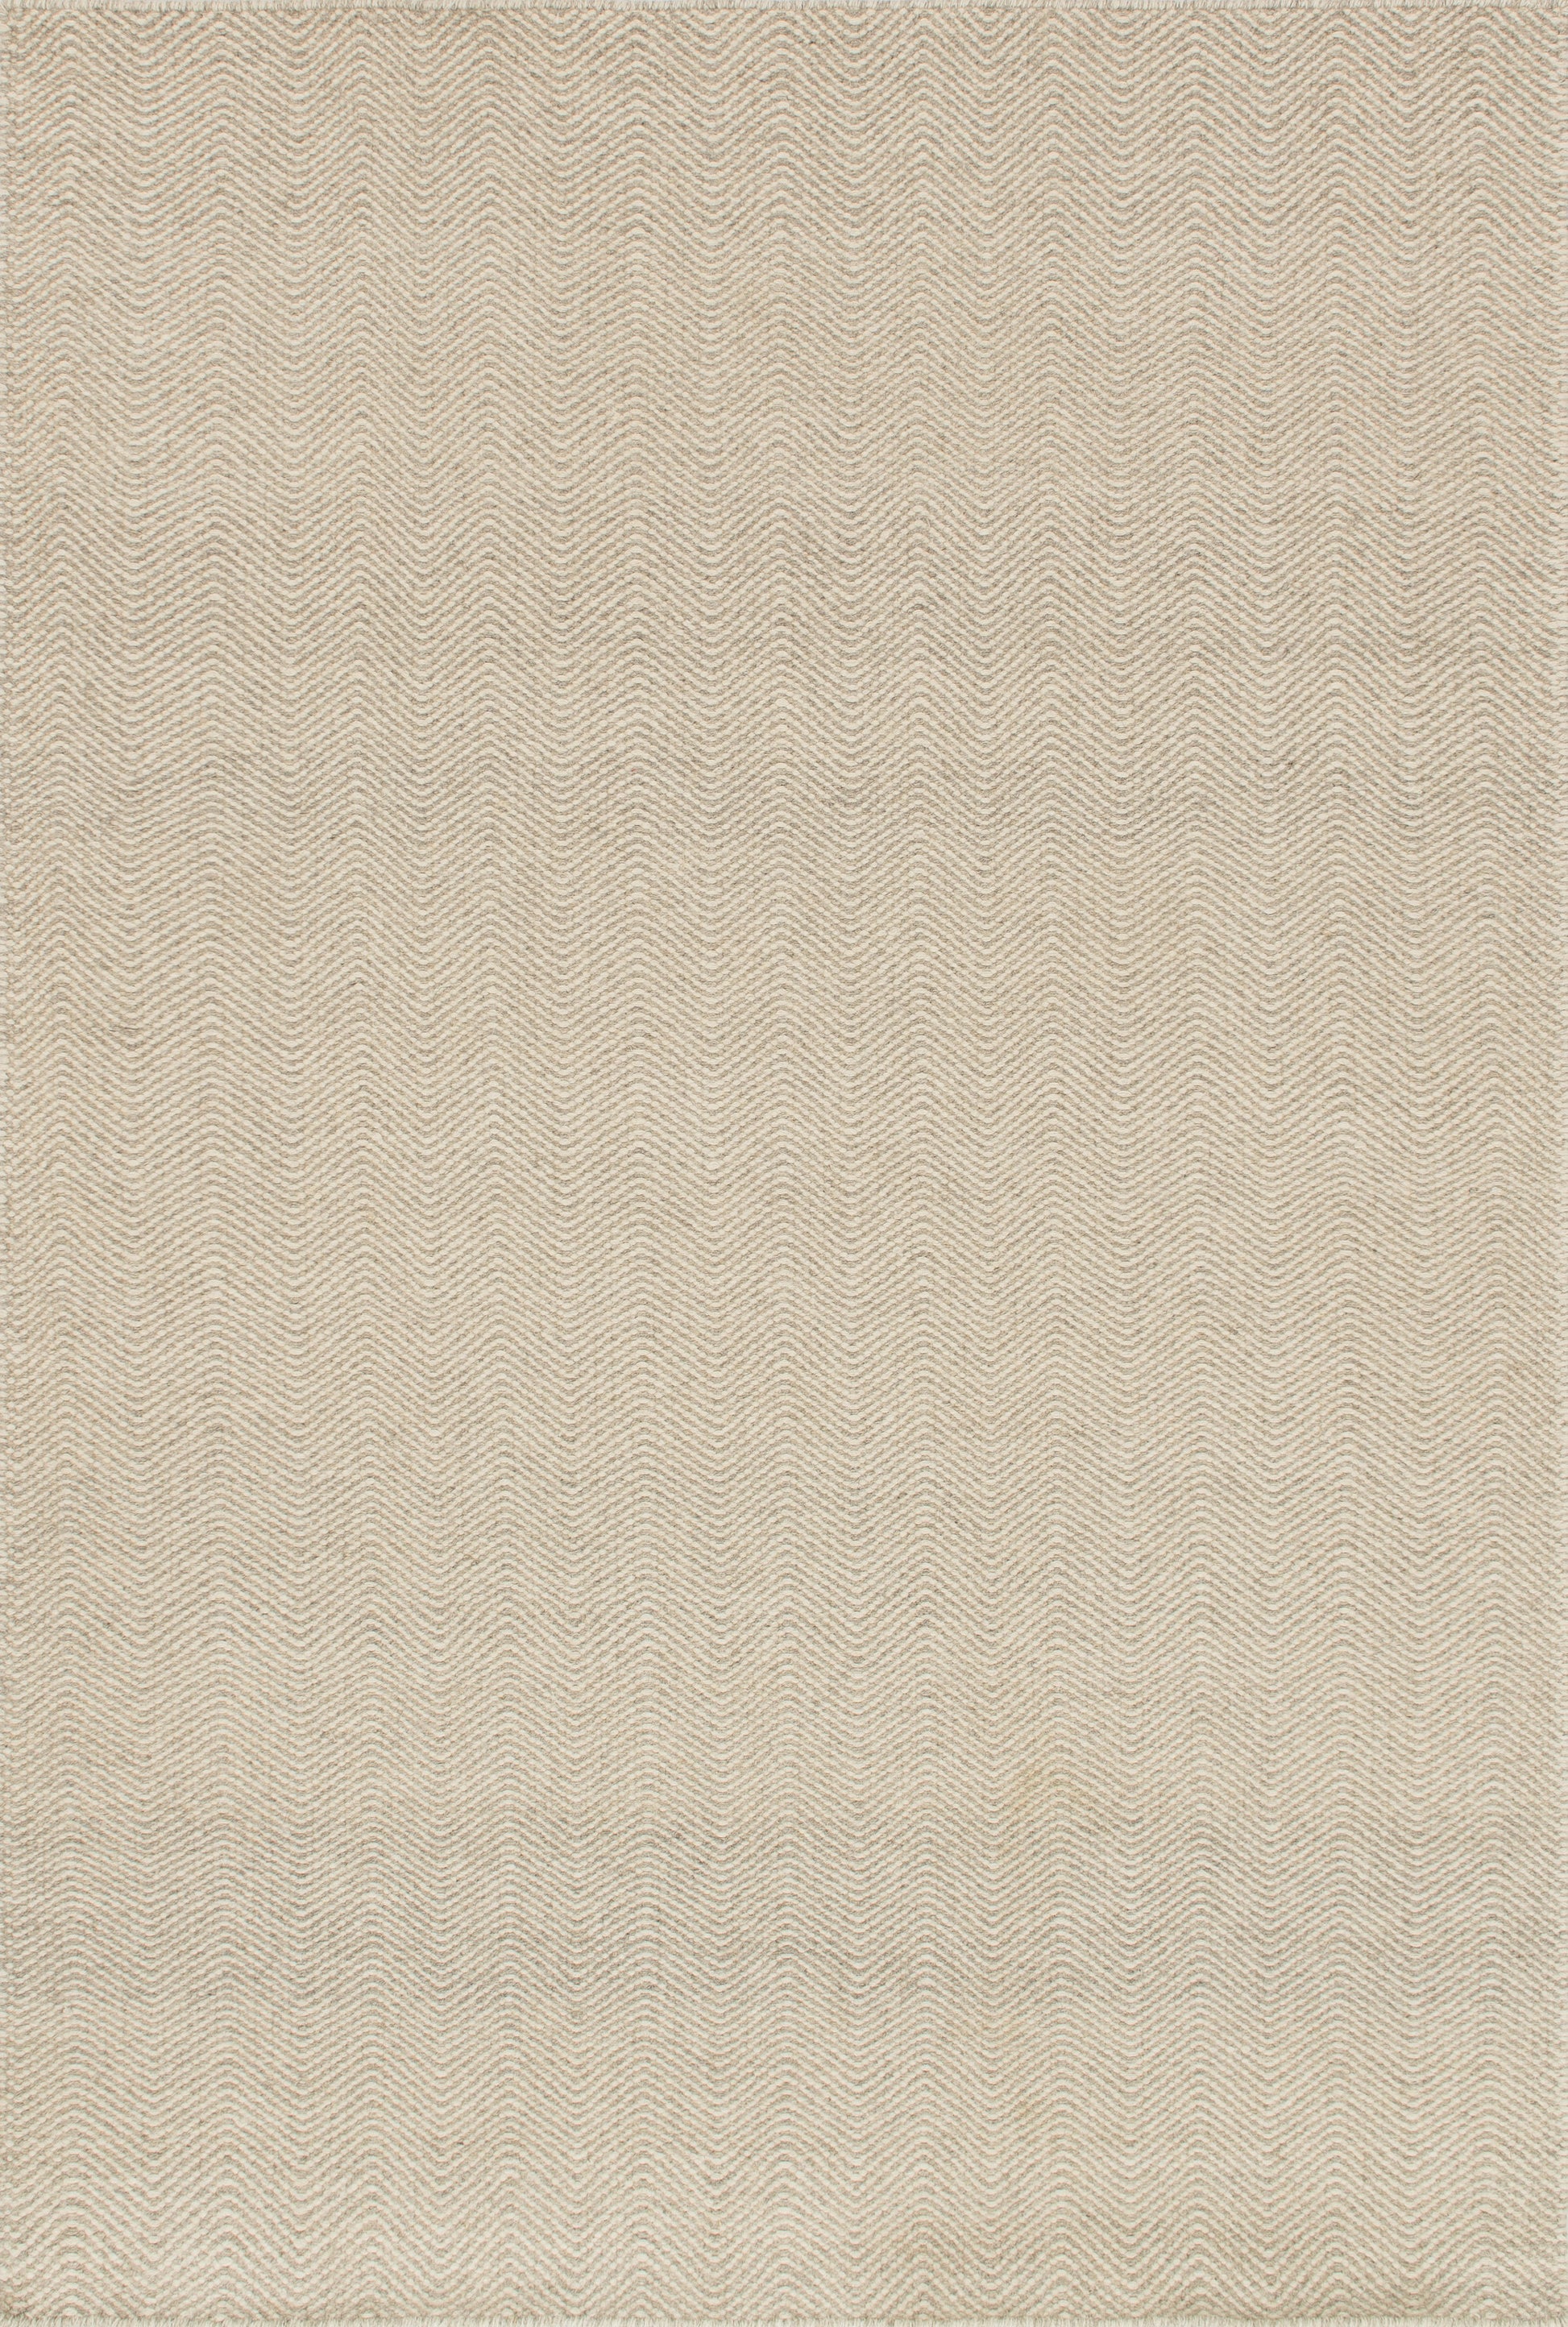 A picture of Loloi's Oakwood rug, in style OK-05, color Gravel